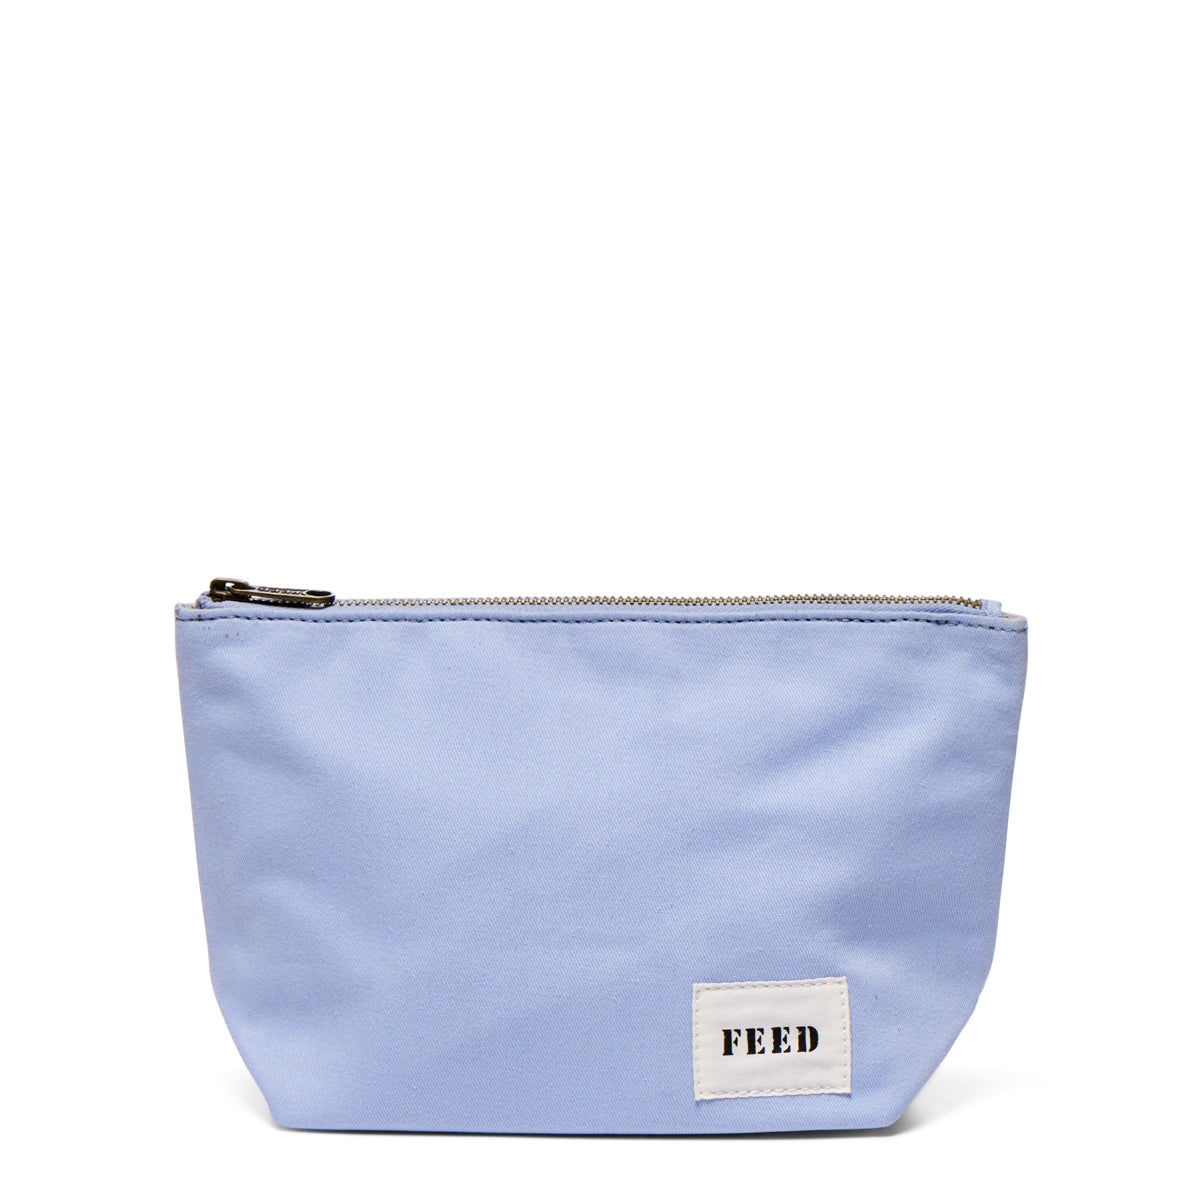 Periwinkle Blue | Pouch front